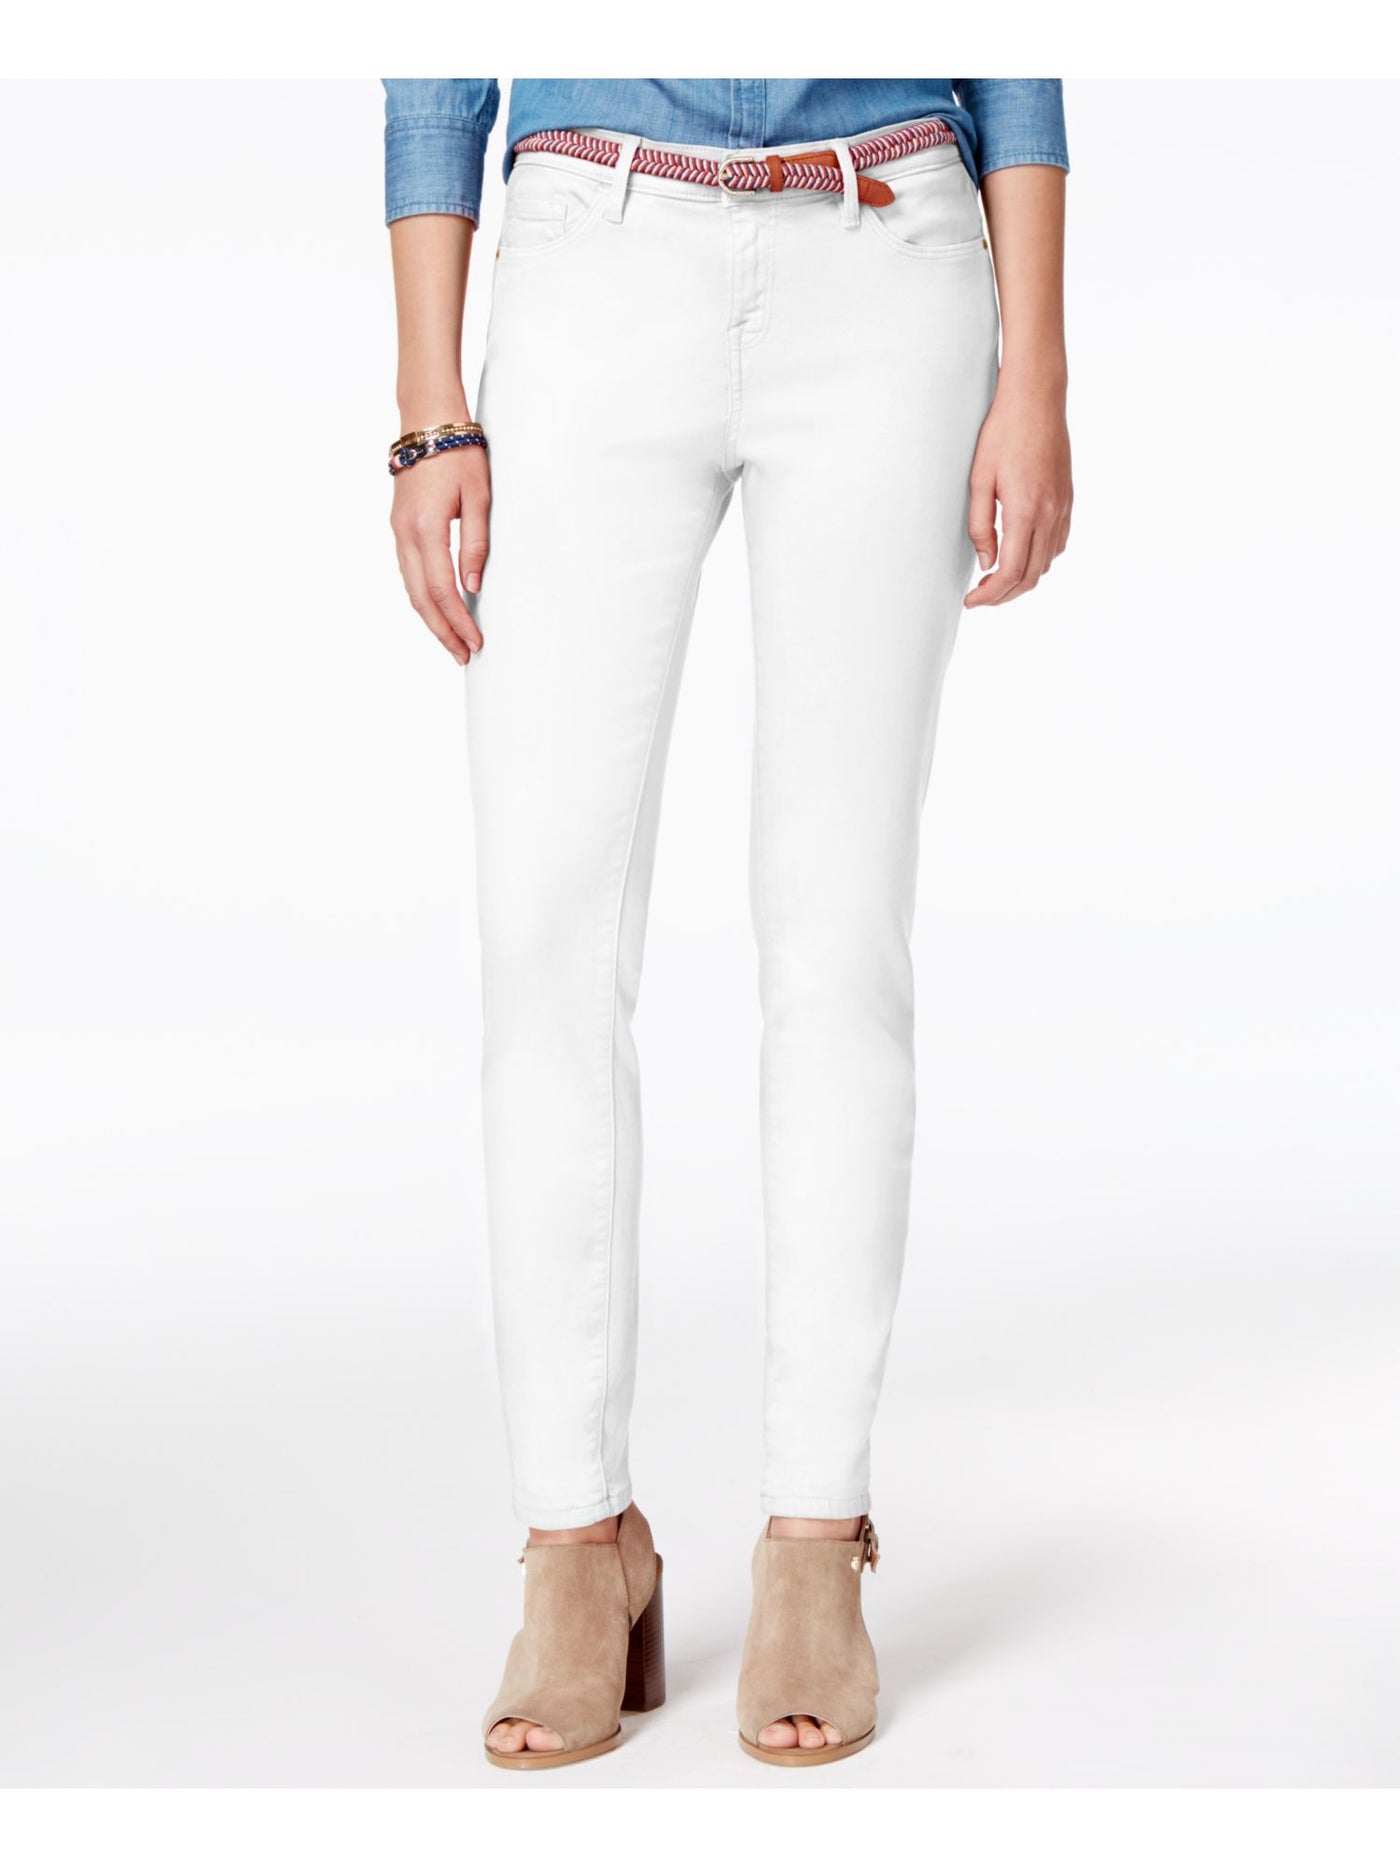 TOMMY HILFIGER Womens White Skinny Jeans 6